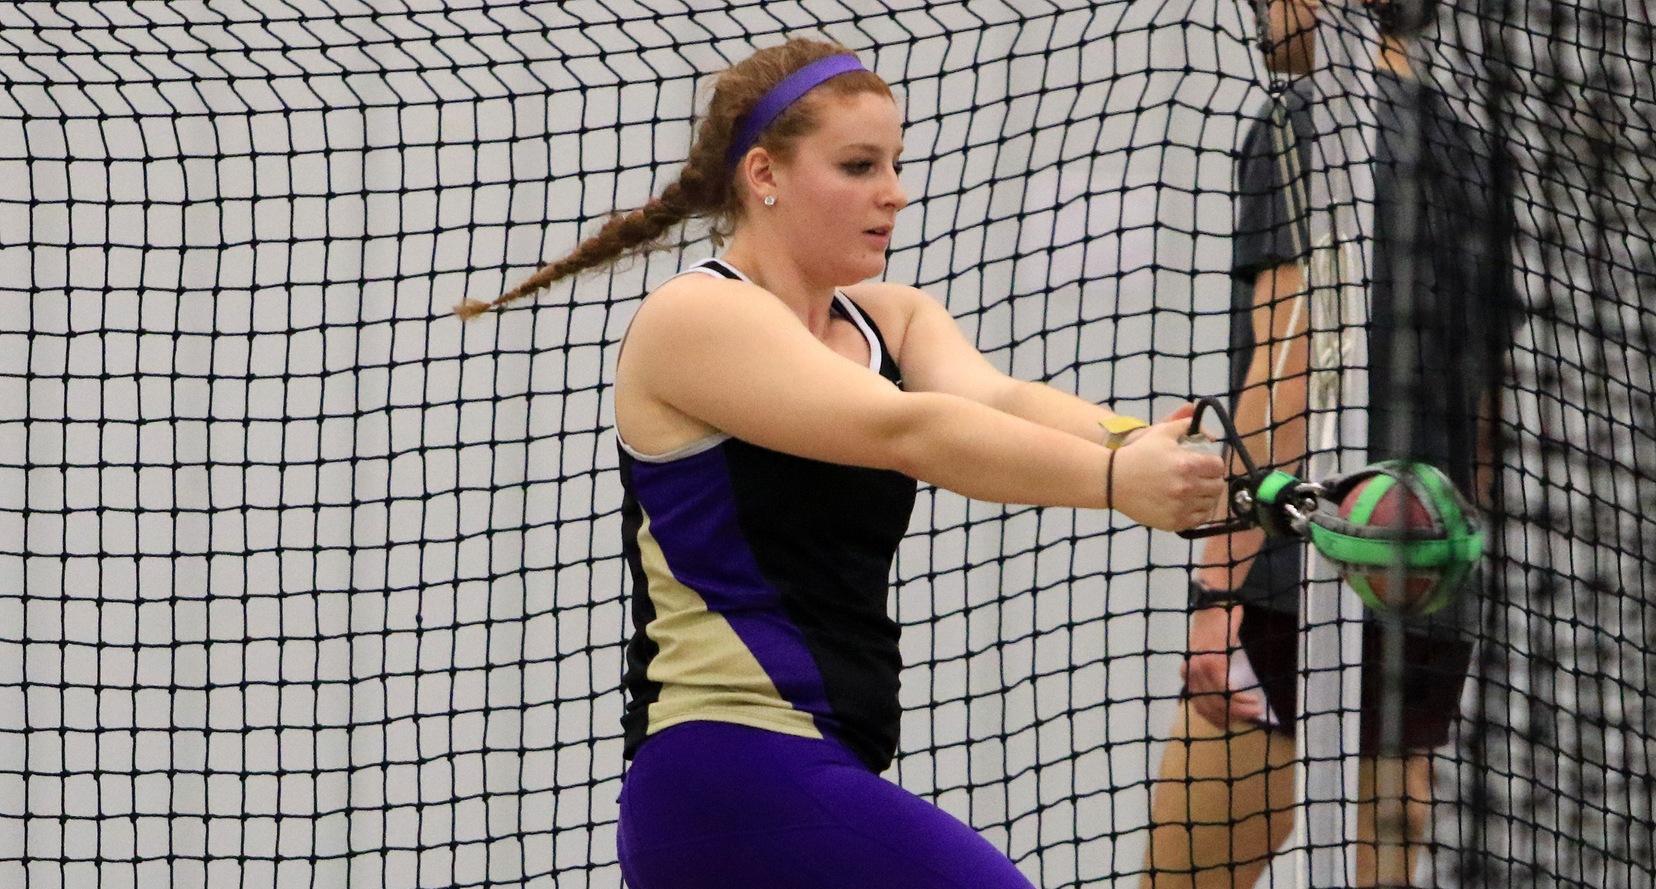 Brooke Waidelich to Represent Defiance College for NCAA Woman of the Year